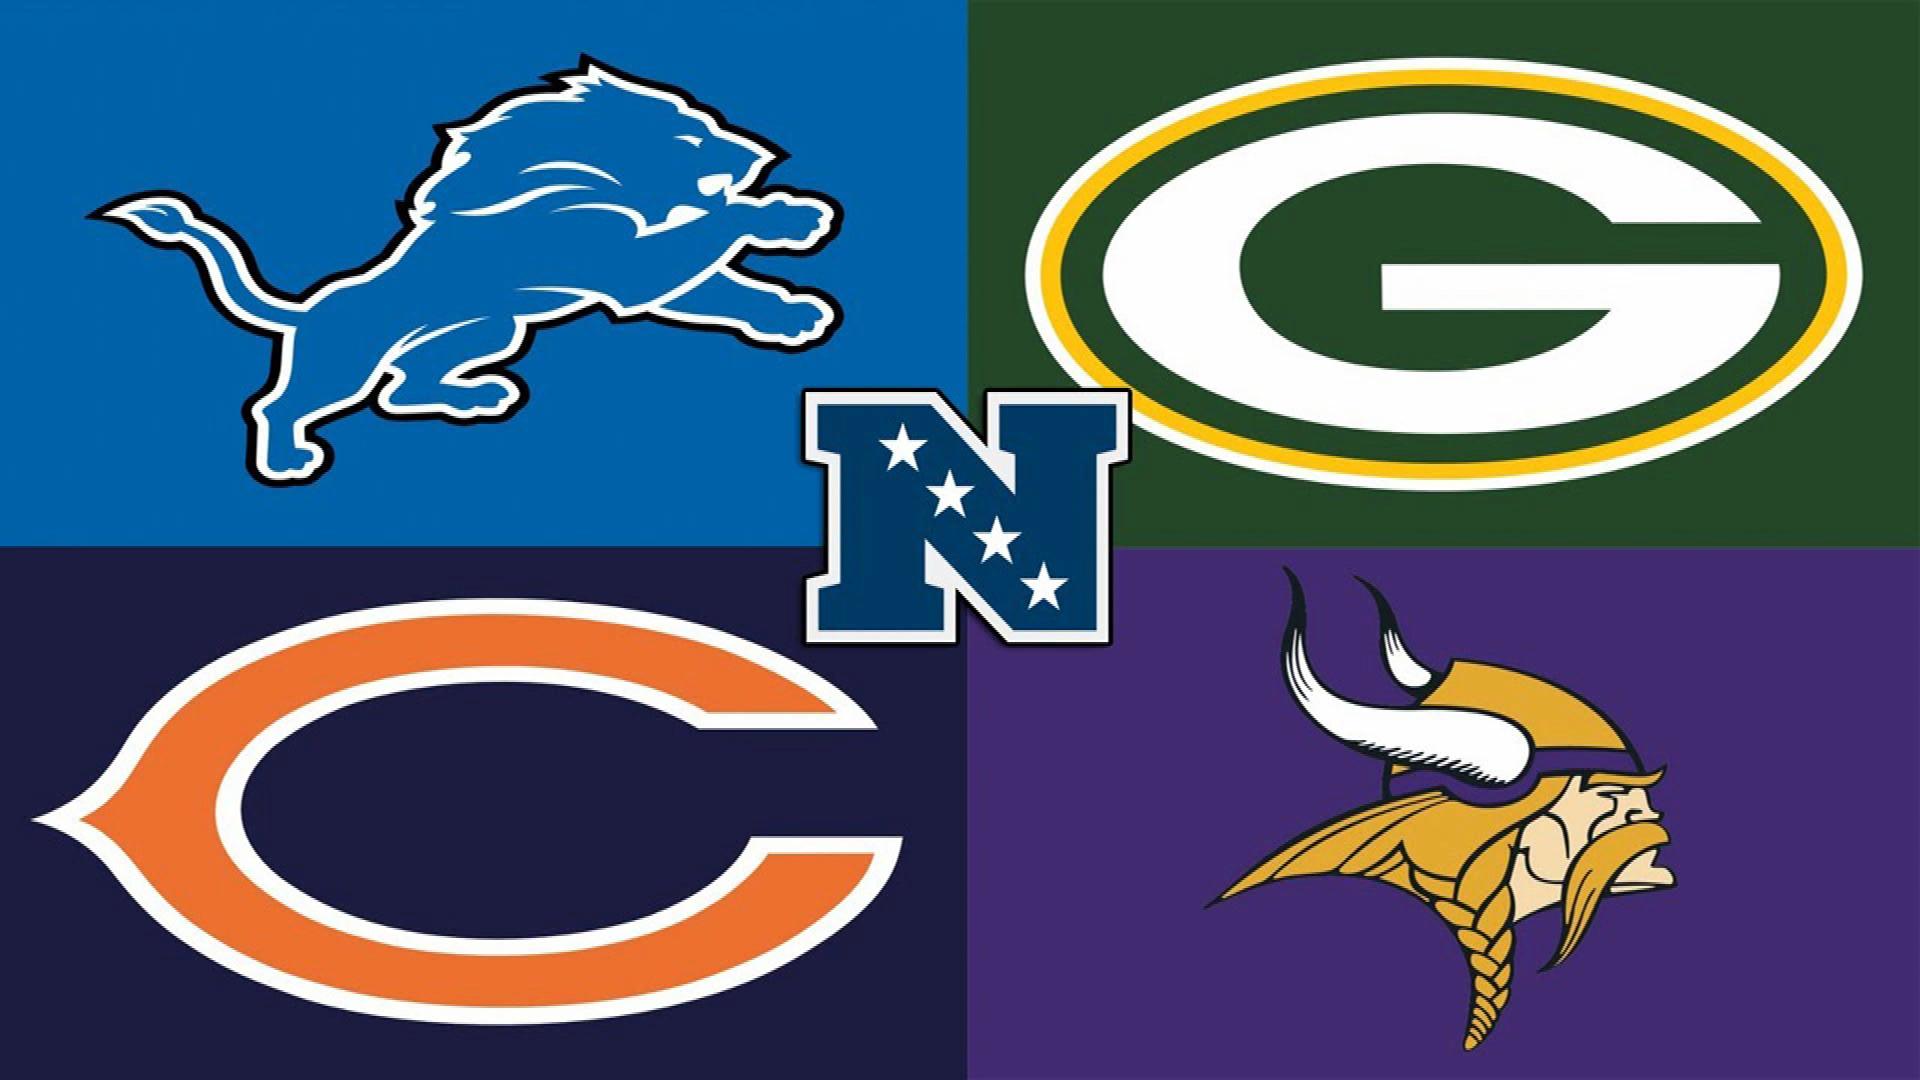 2020 NFC North Division Odds – Green Bay Packers +130 Favorite at Bovada